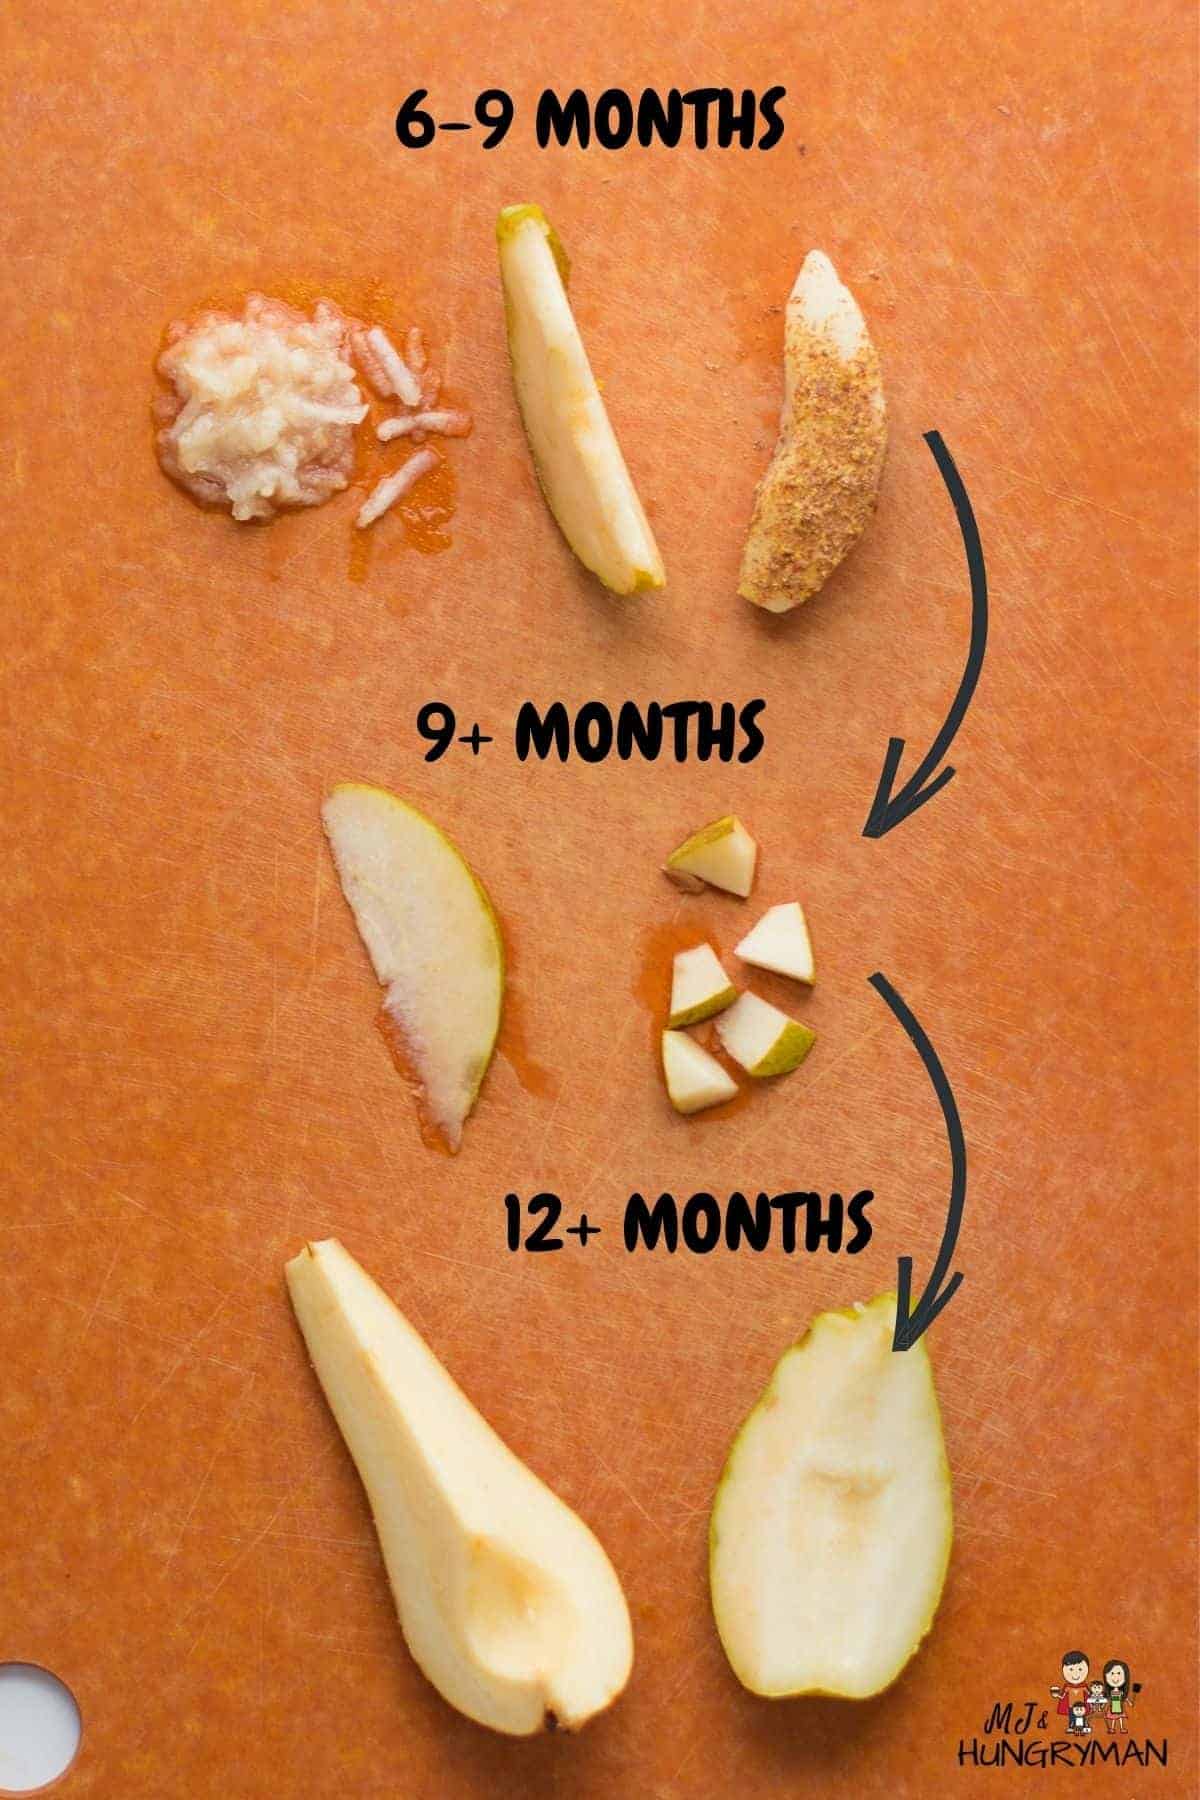 a graphic showing how to cut pear for babies 6-9 months, 9 plus months, and 12 plus months.